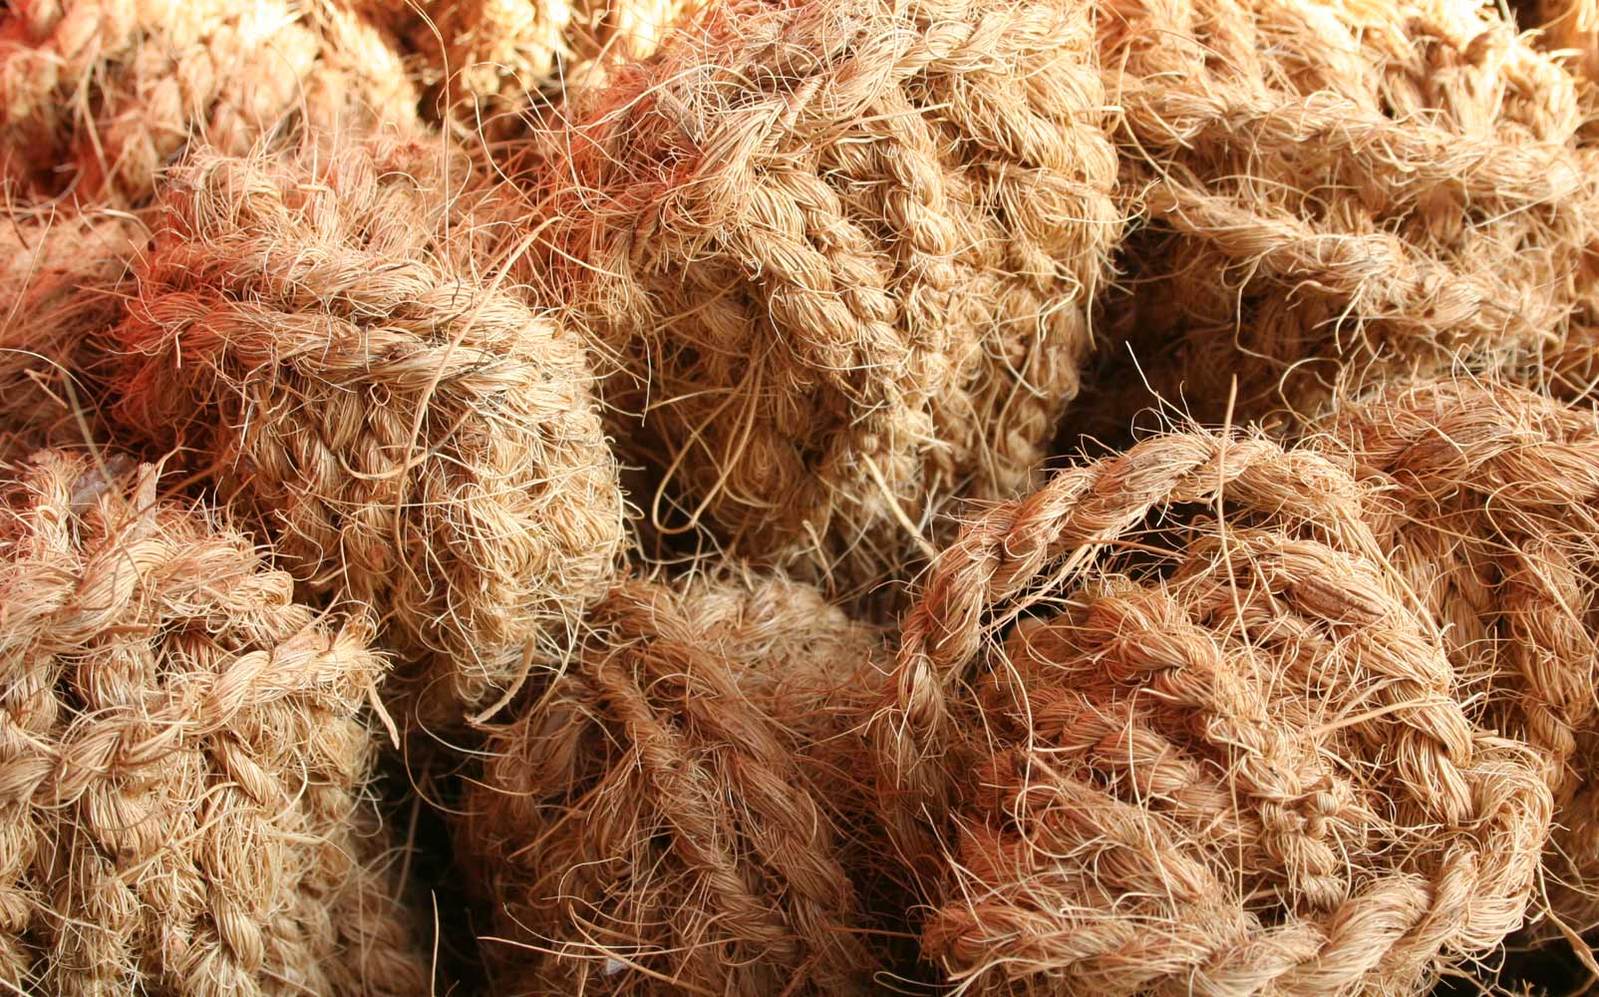 some hay is piled up close to the camera